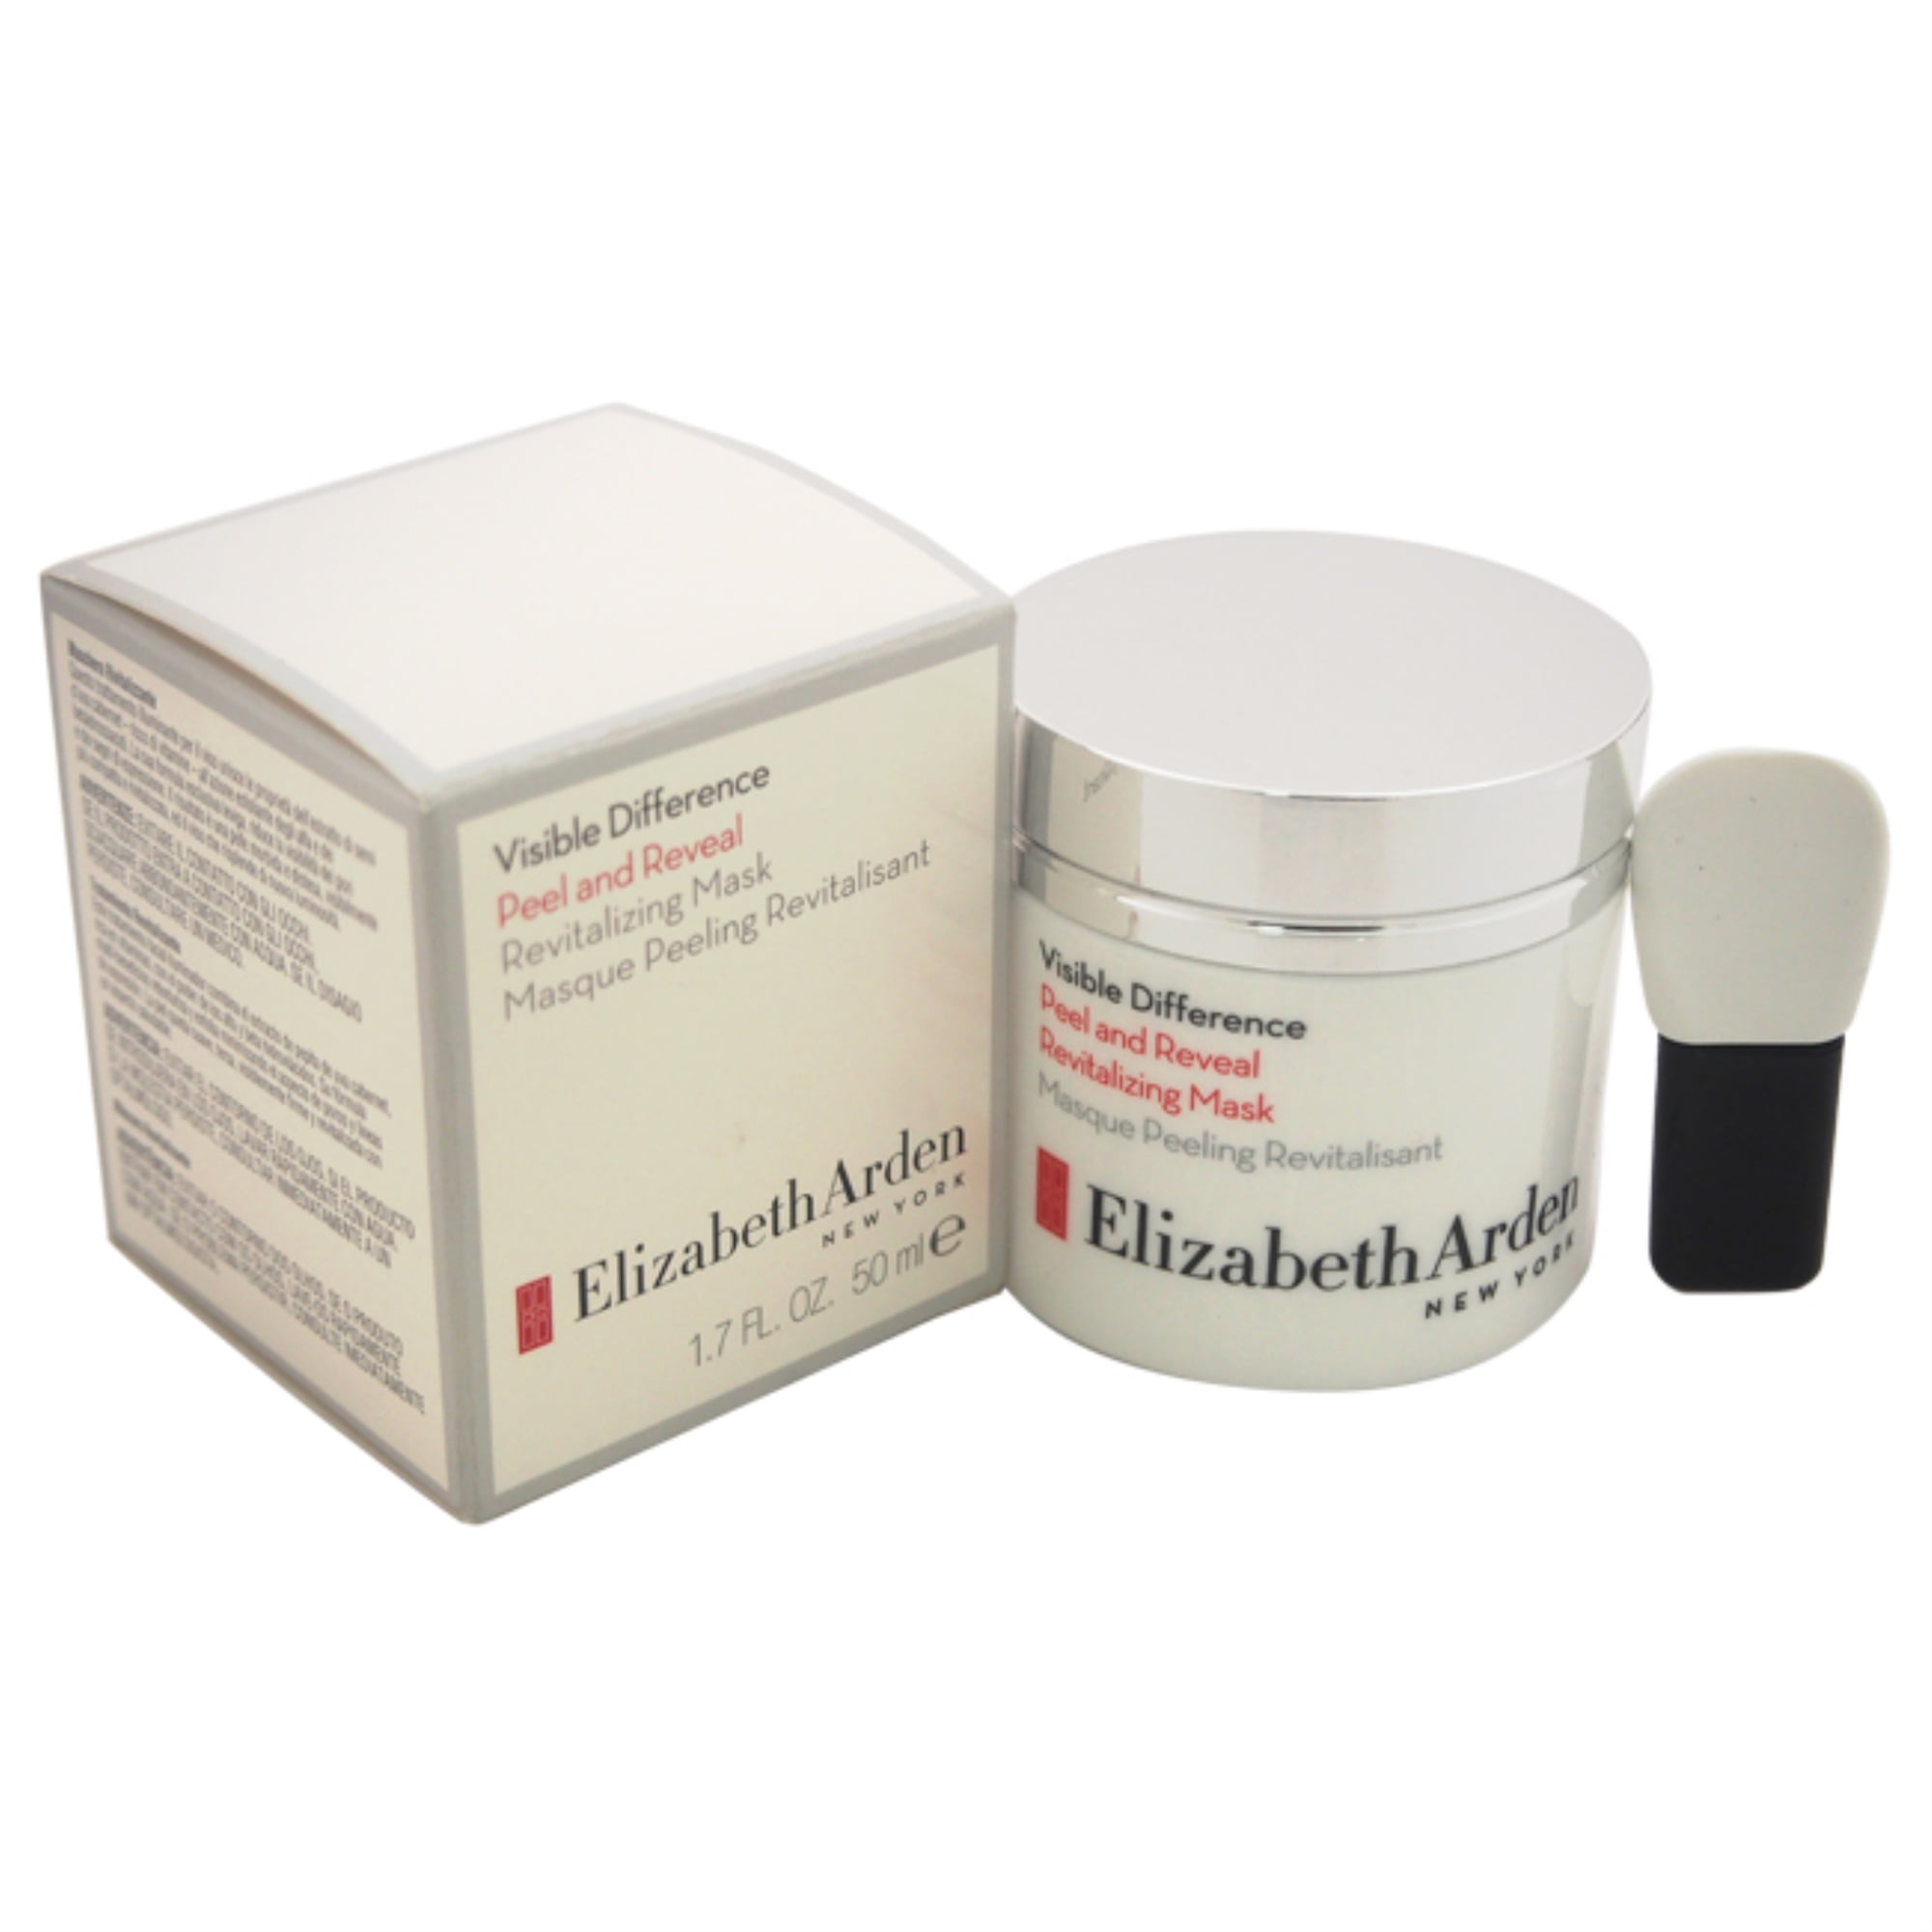 Visible Difference and Reveal Revitalizing Face Mask by Elizabeth Arden for - 1.7 oz Face Mask - Walmart.com